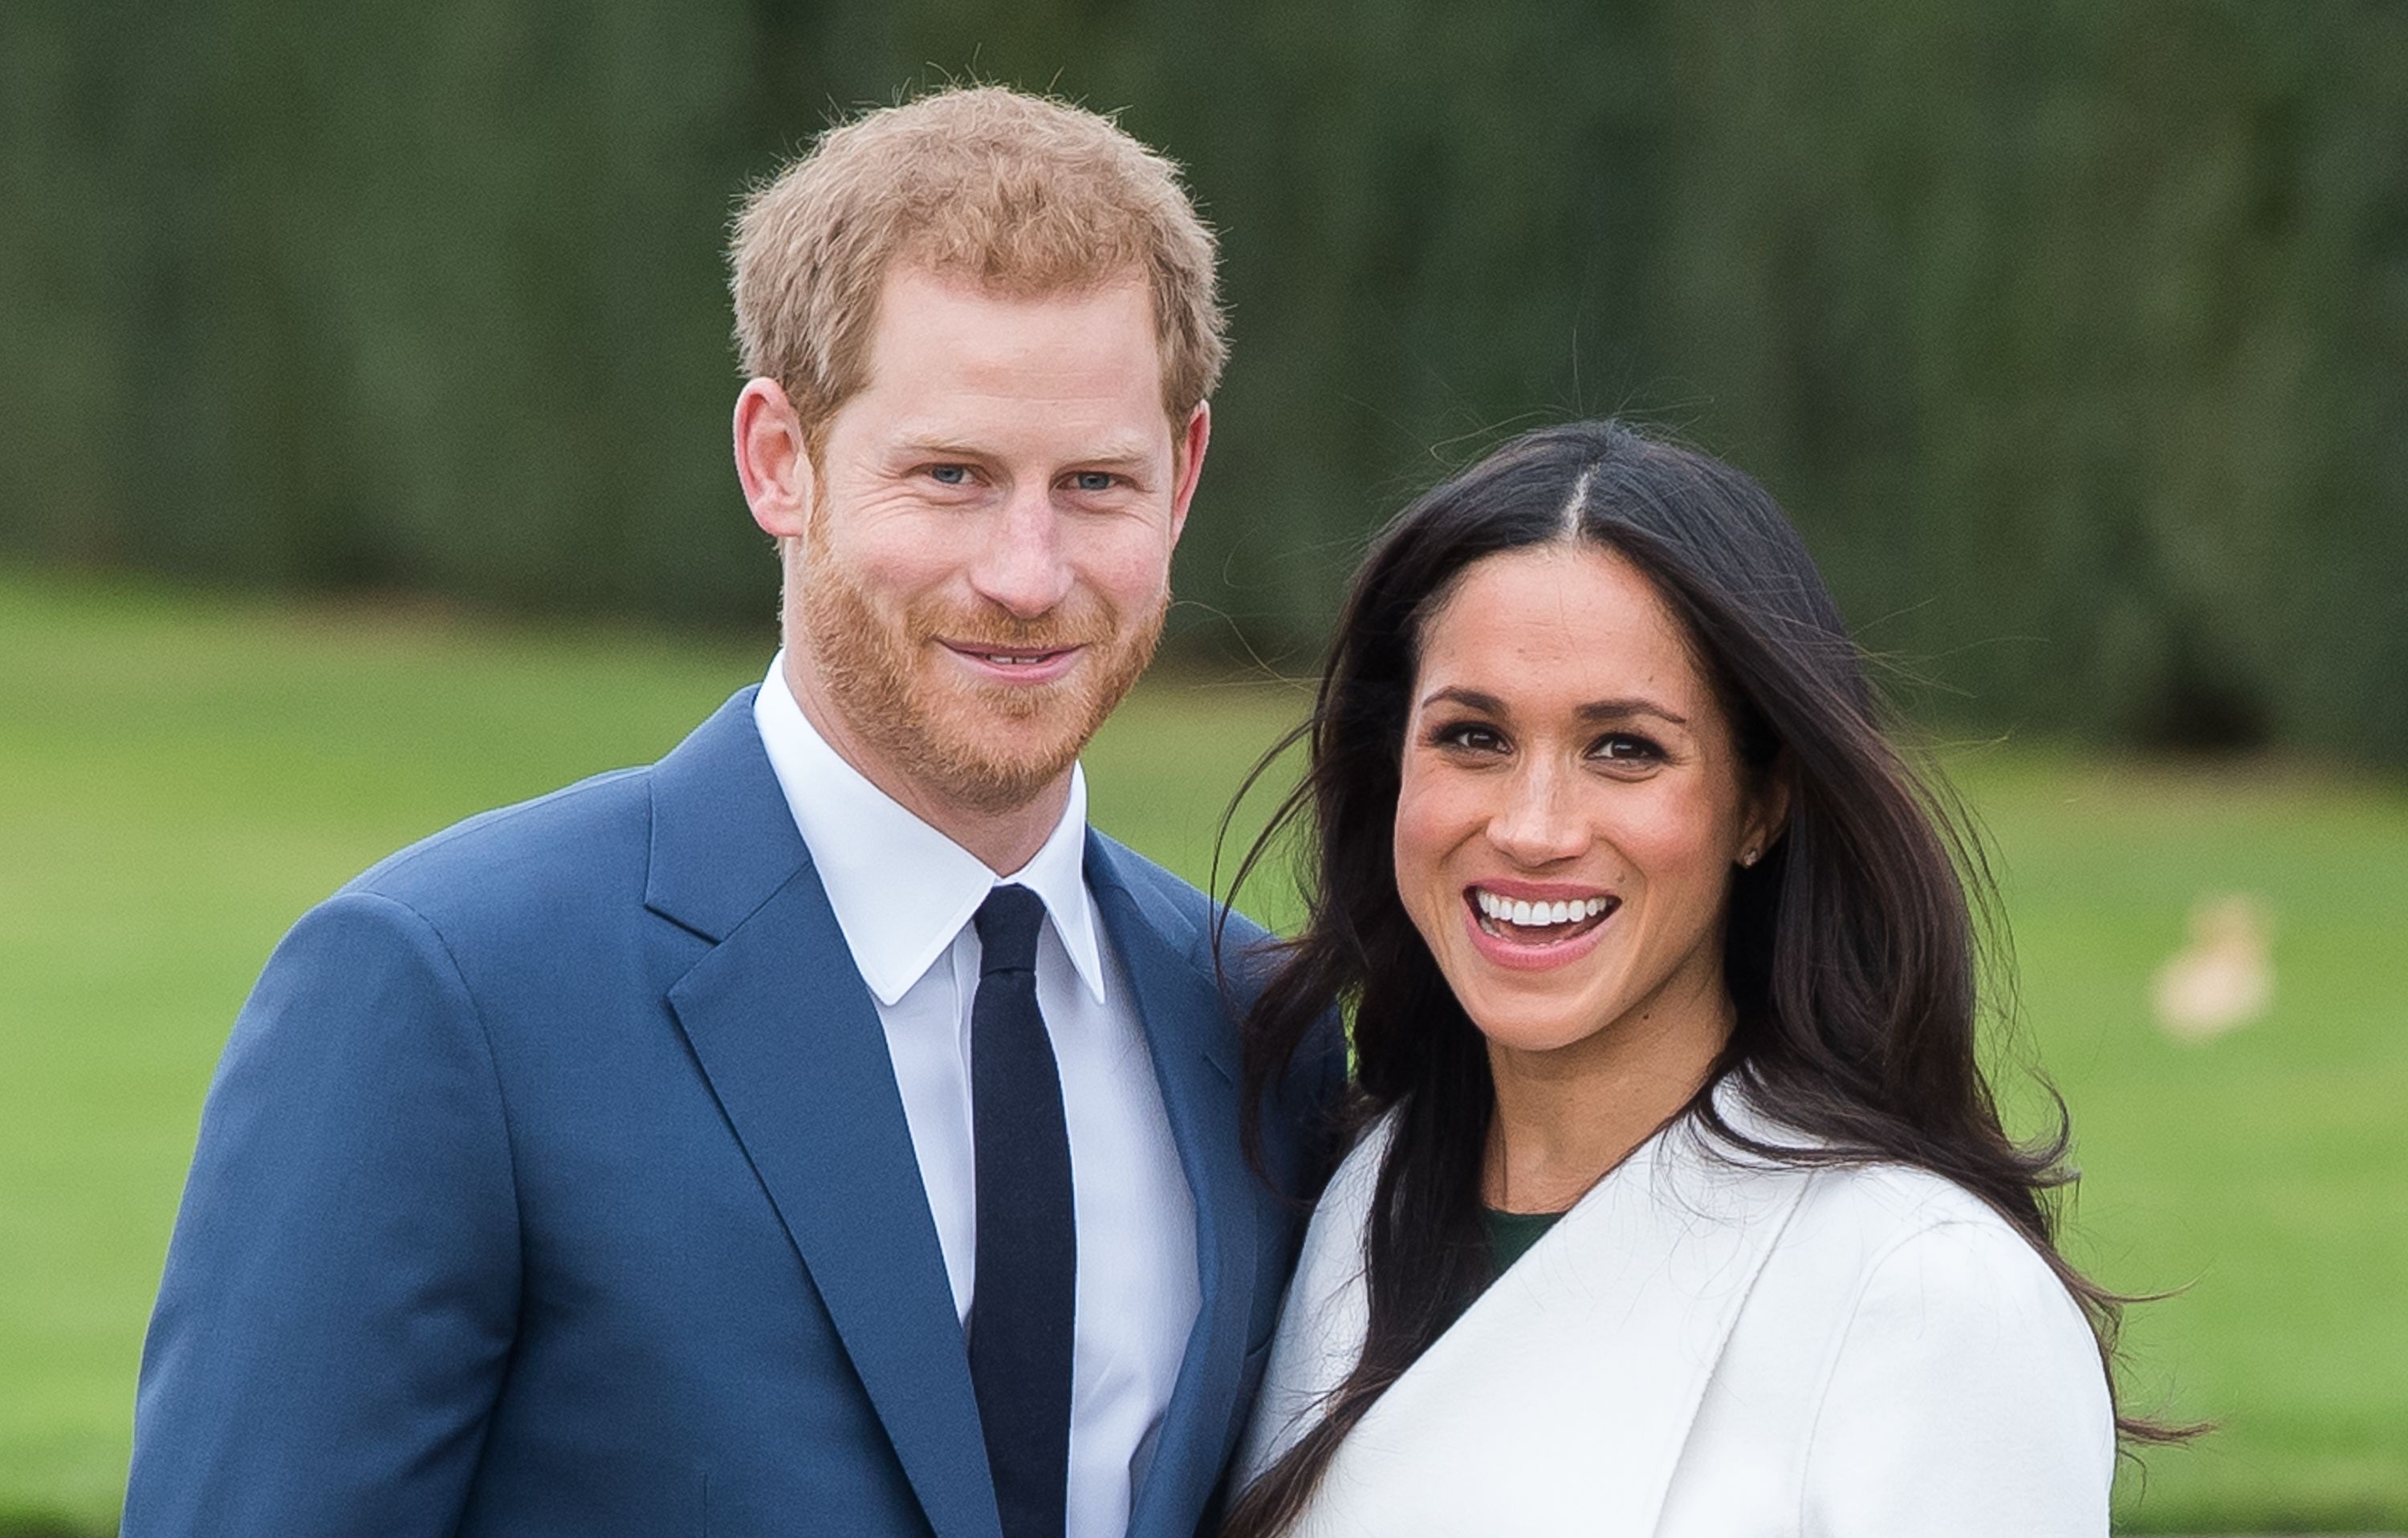 Prince Harry and Meghan Markle during an official photocall to announce their engagement at The Sunken Gardens at Kensington Palace | Photo: Getty Images